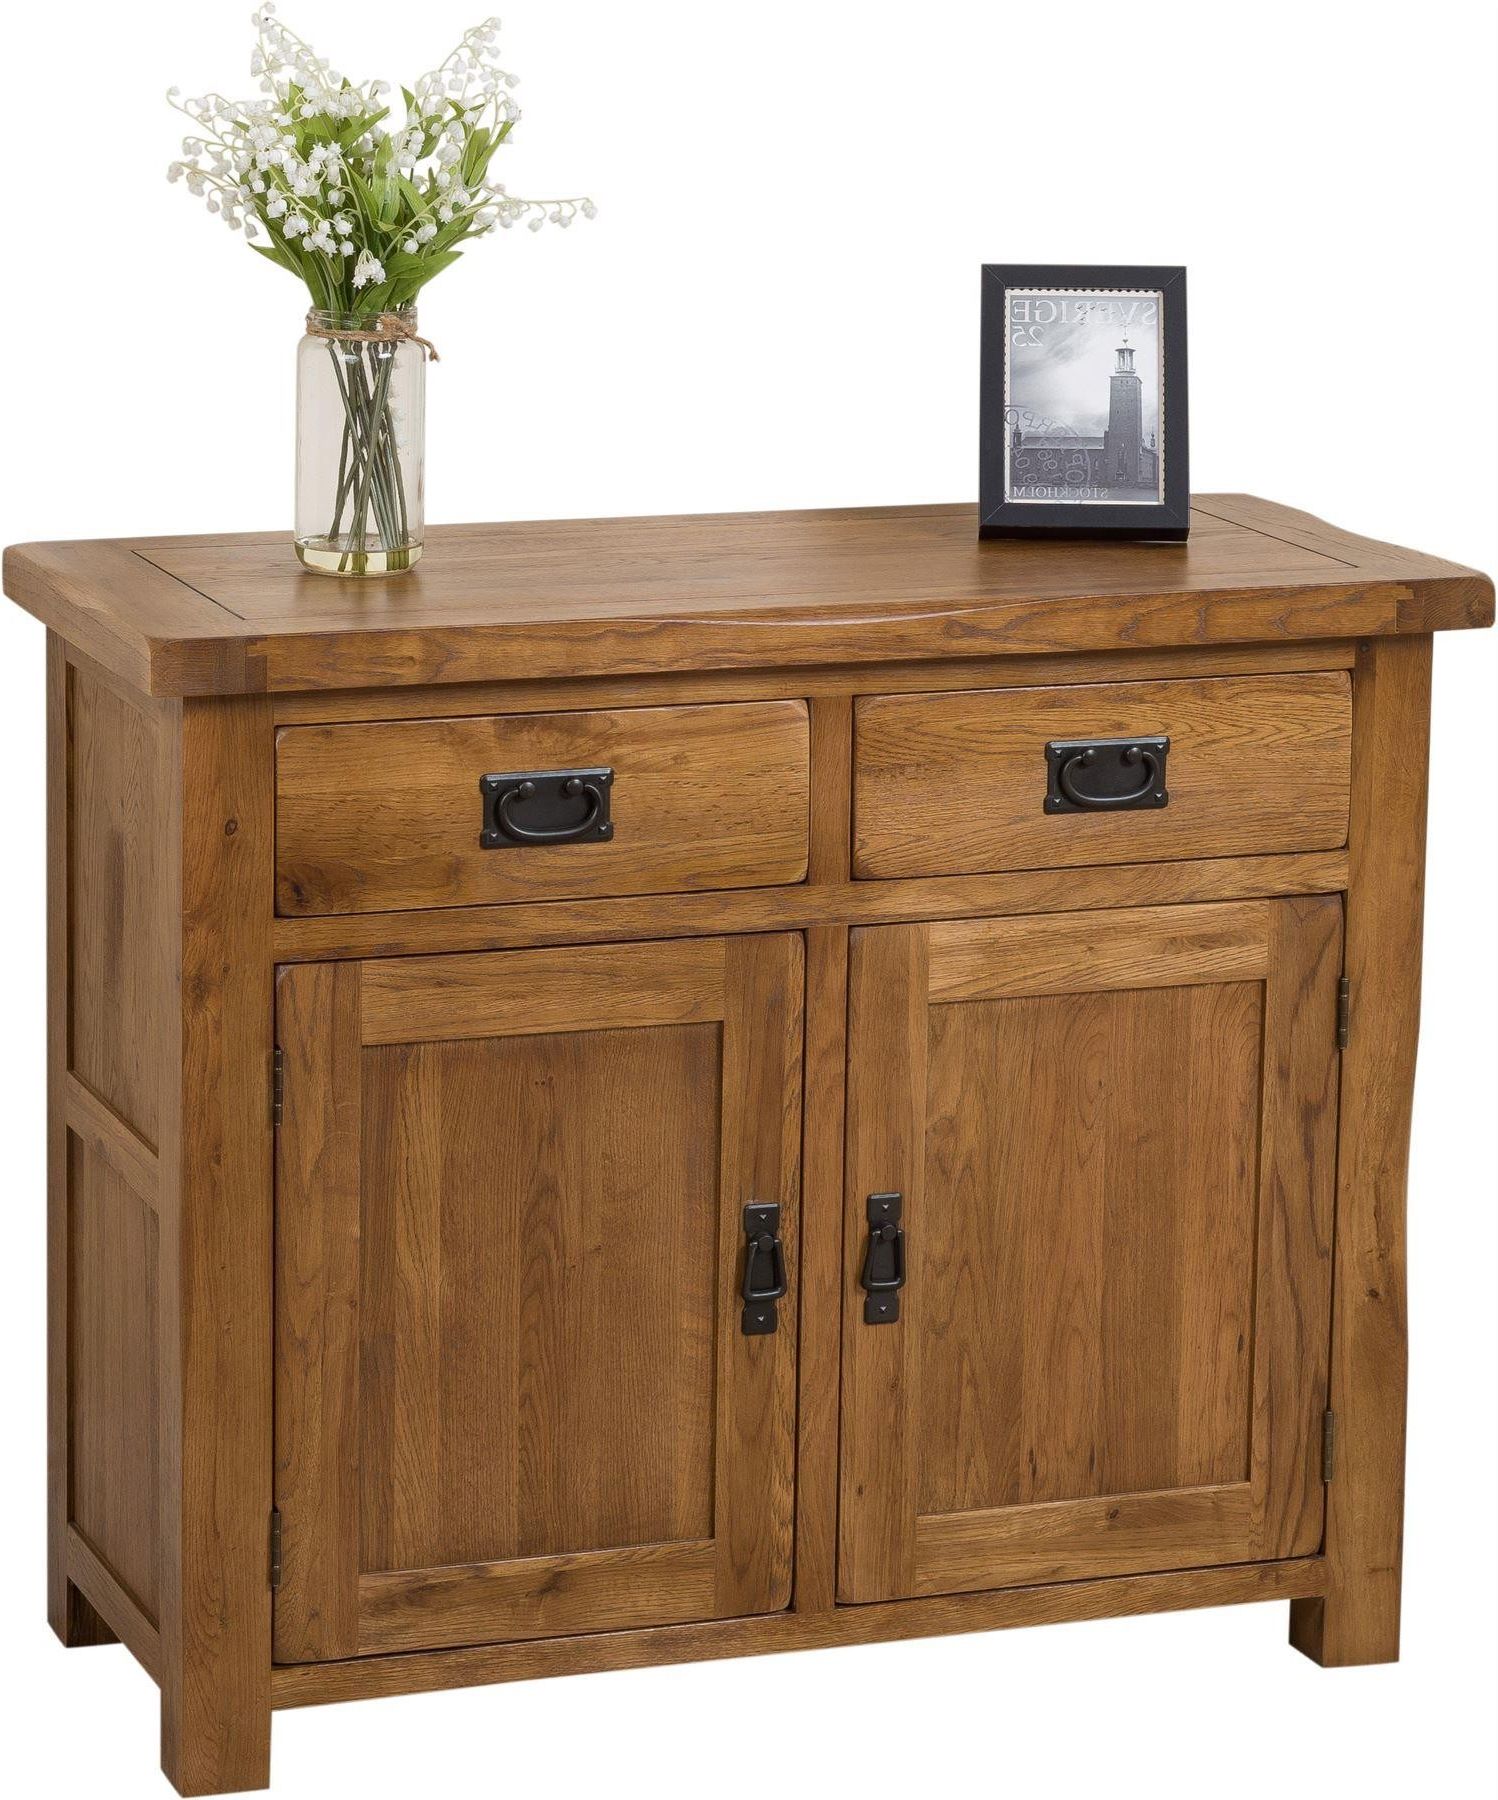 Cotswold Rustic Small Oak Sideboard | Modern Furniture Direct Within Rustic Oak Sideboards (Gallery 6 of 20)